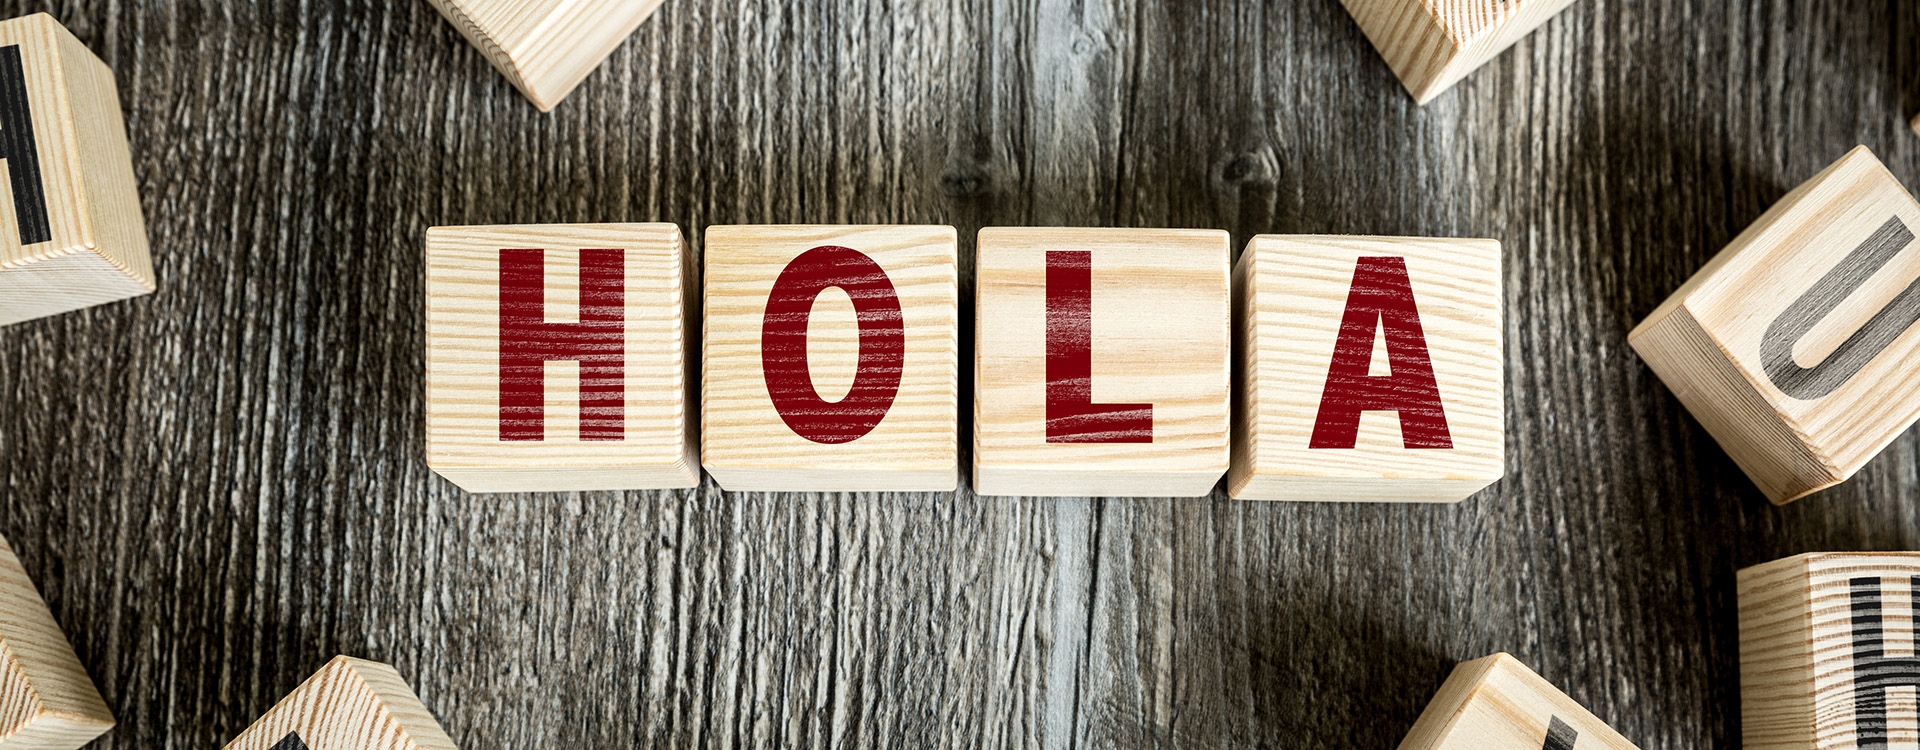 Spanish word for hello HOLA spelled with toy blocks